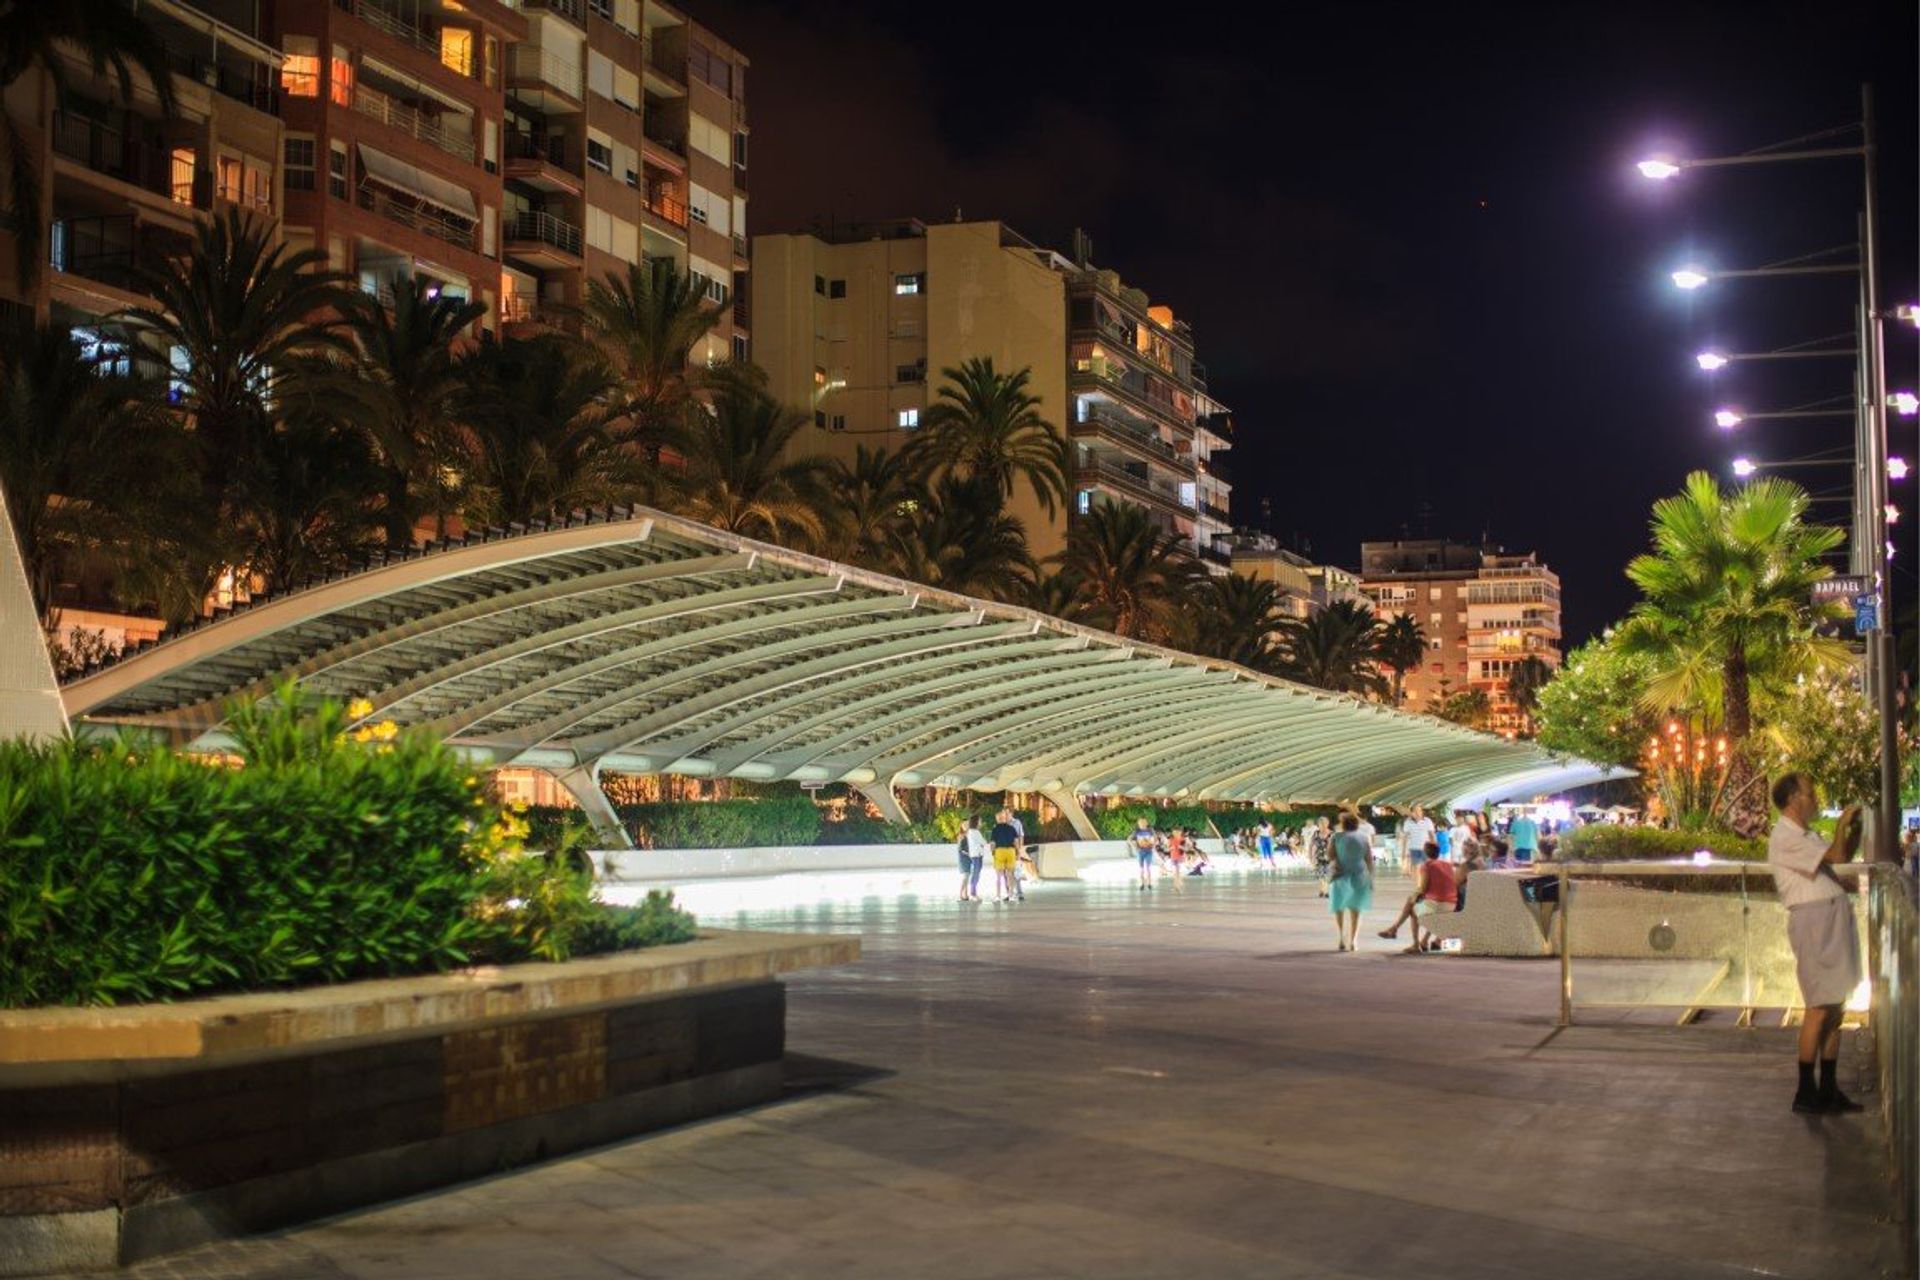 Torrevieja's large promenade has all the amenities and facilities you need for a modern Mediterranean holiday